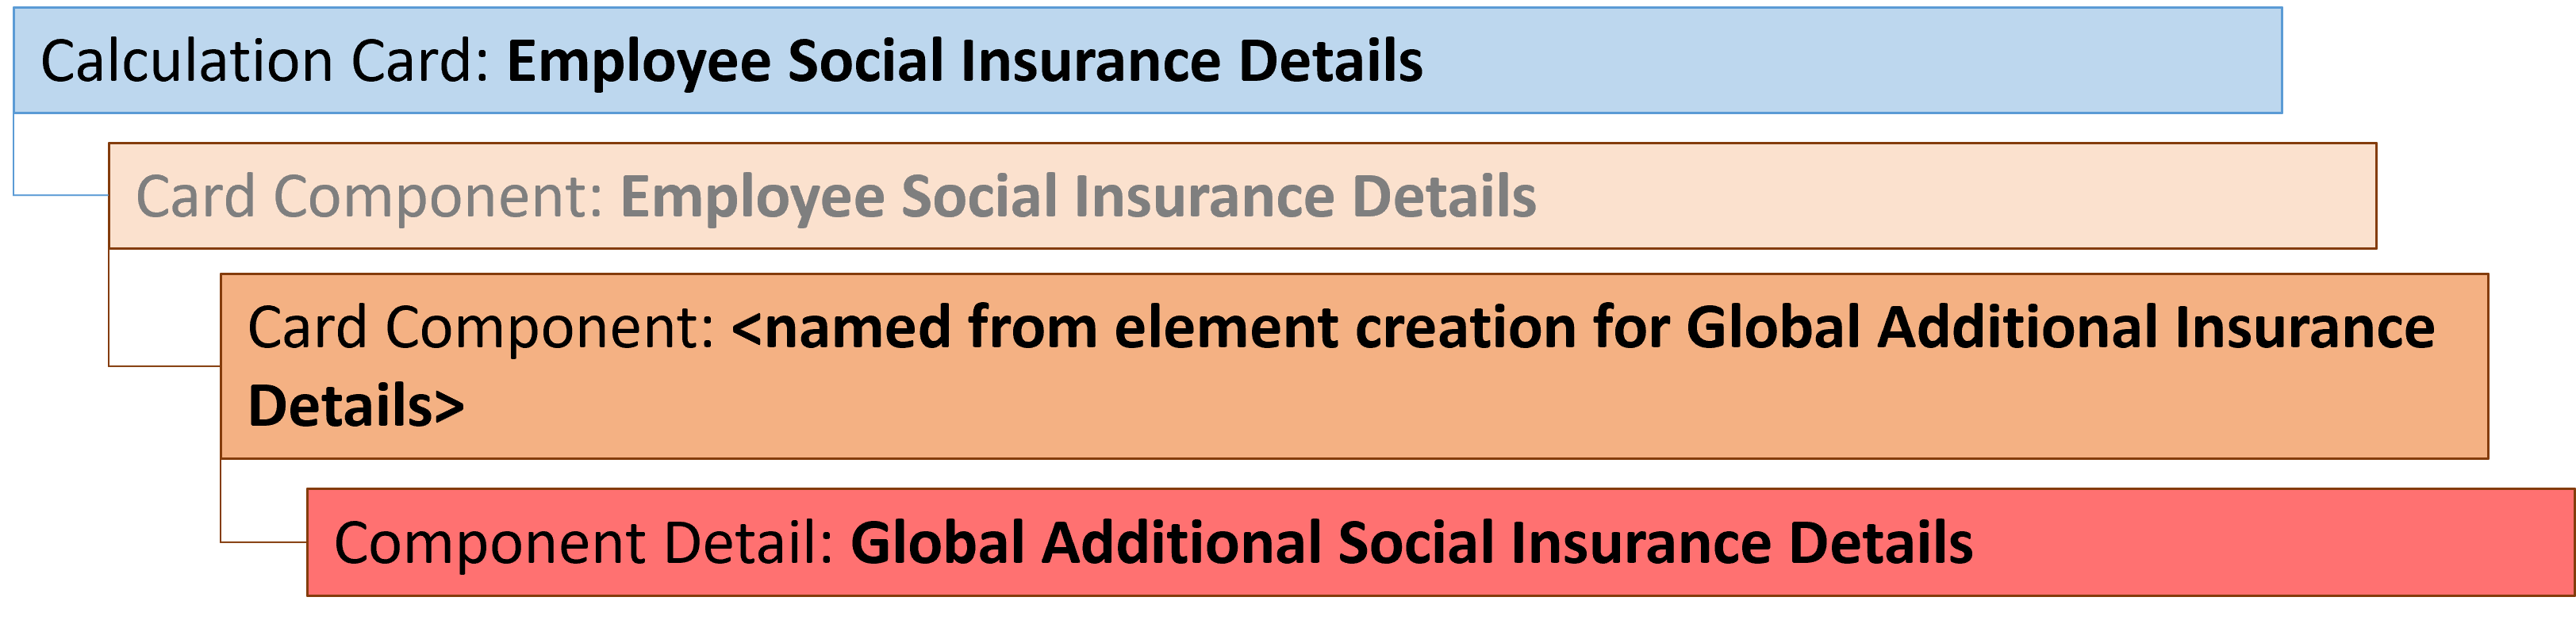 kw employee social insurance details global additional card component